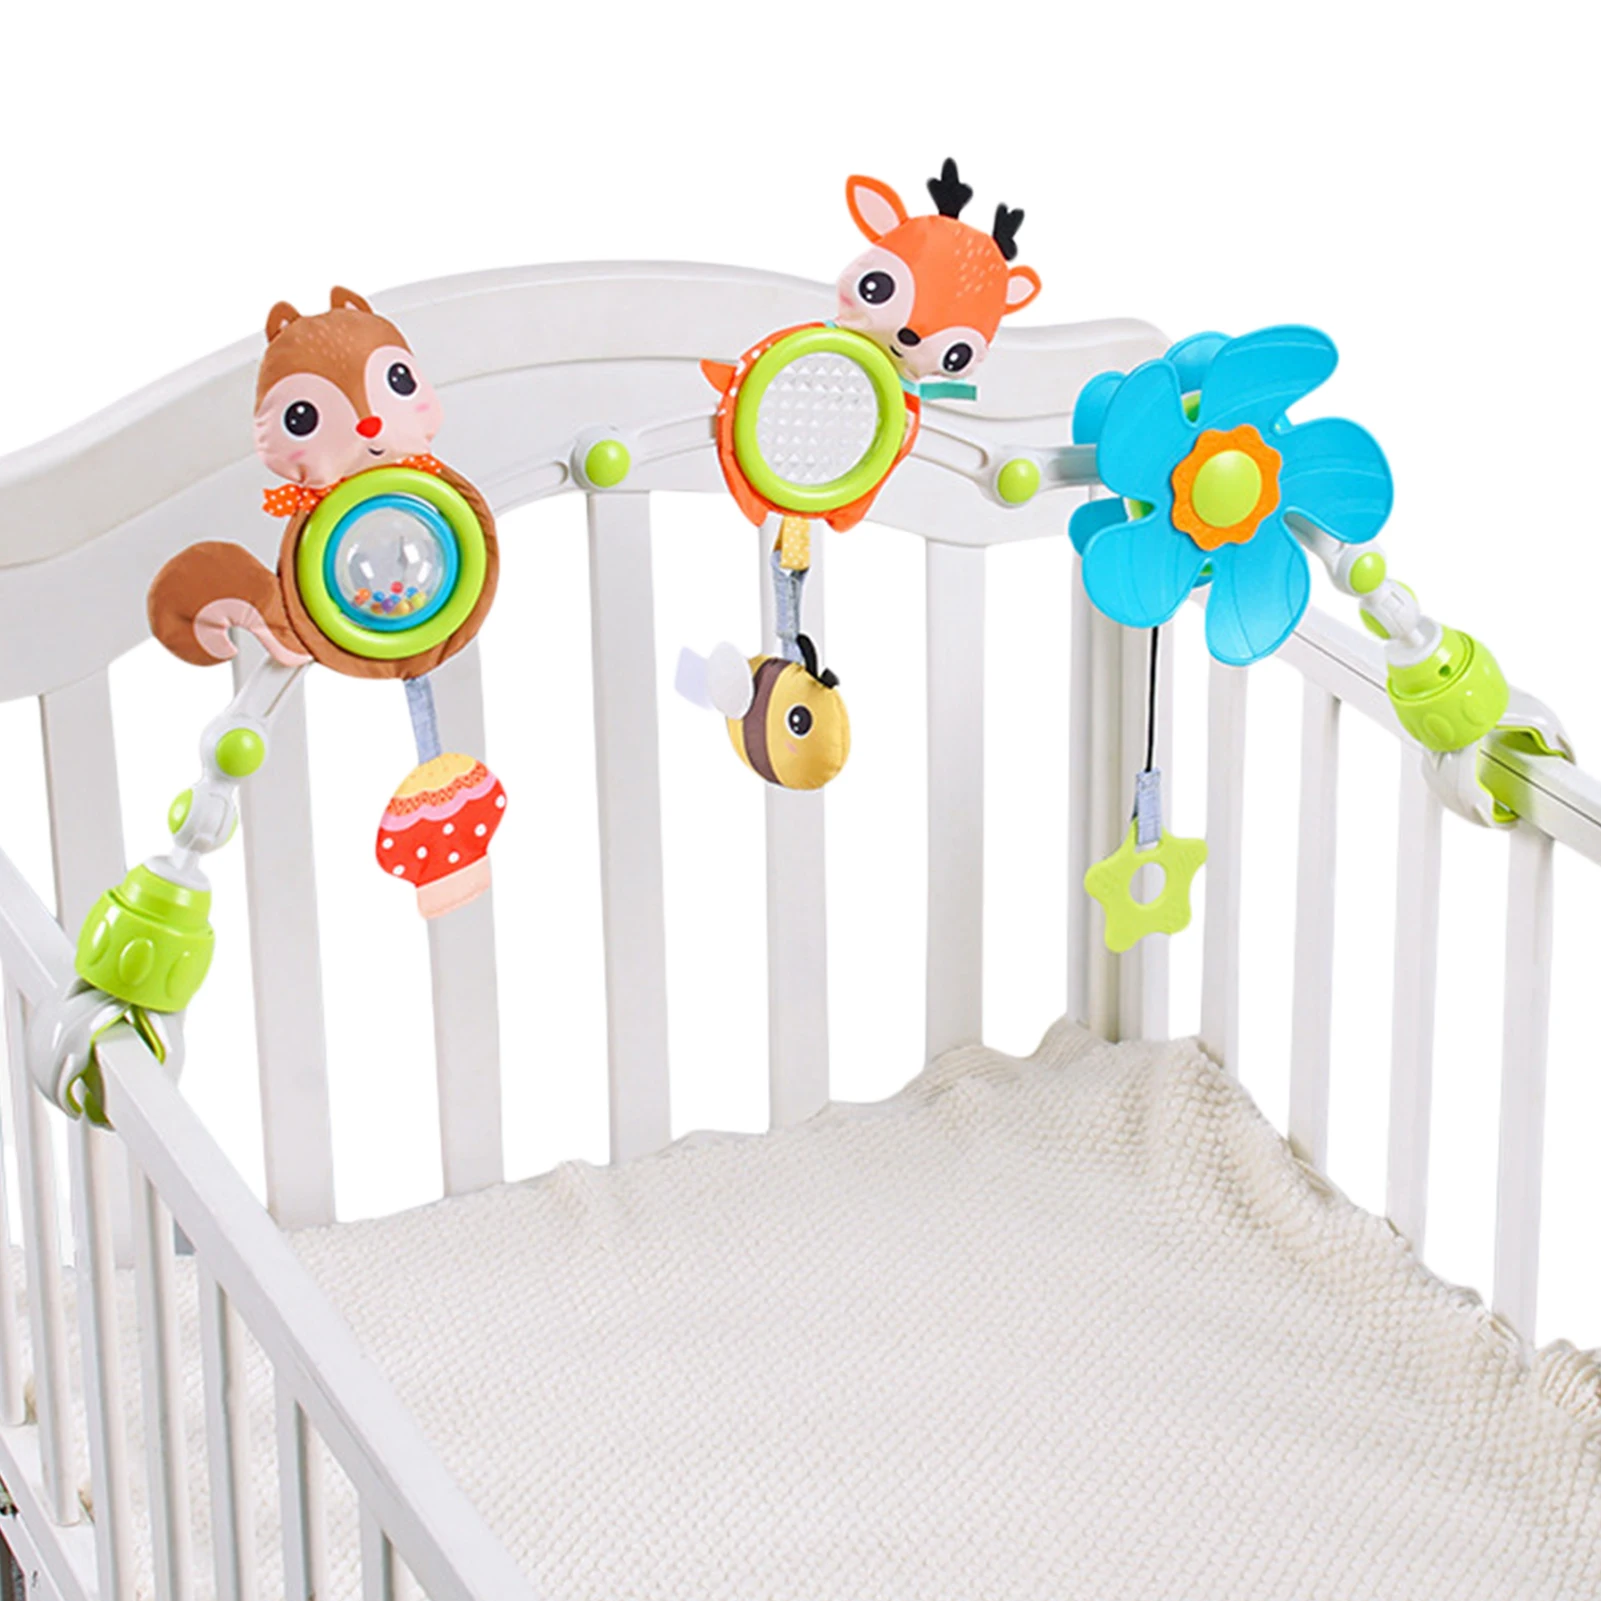 

Stroller Toys Stroller Arch Multipurpose Carseat Baby Toys Deer Animal Theme Arch-Shaped Cute Stroller Newborn Toys Clip On